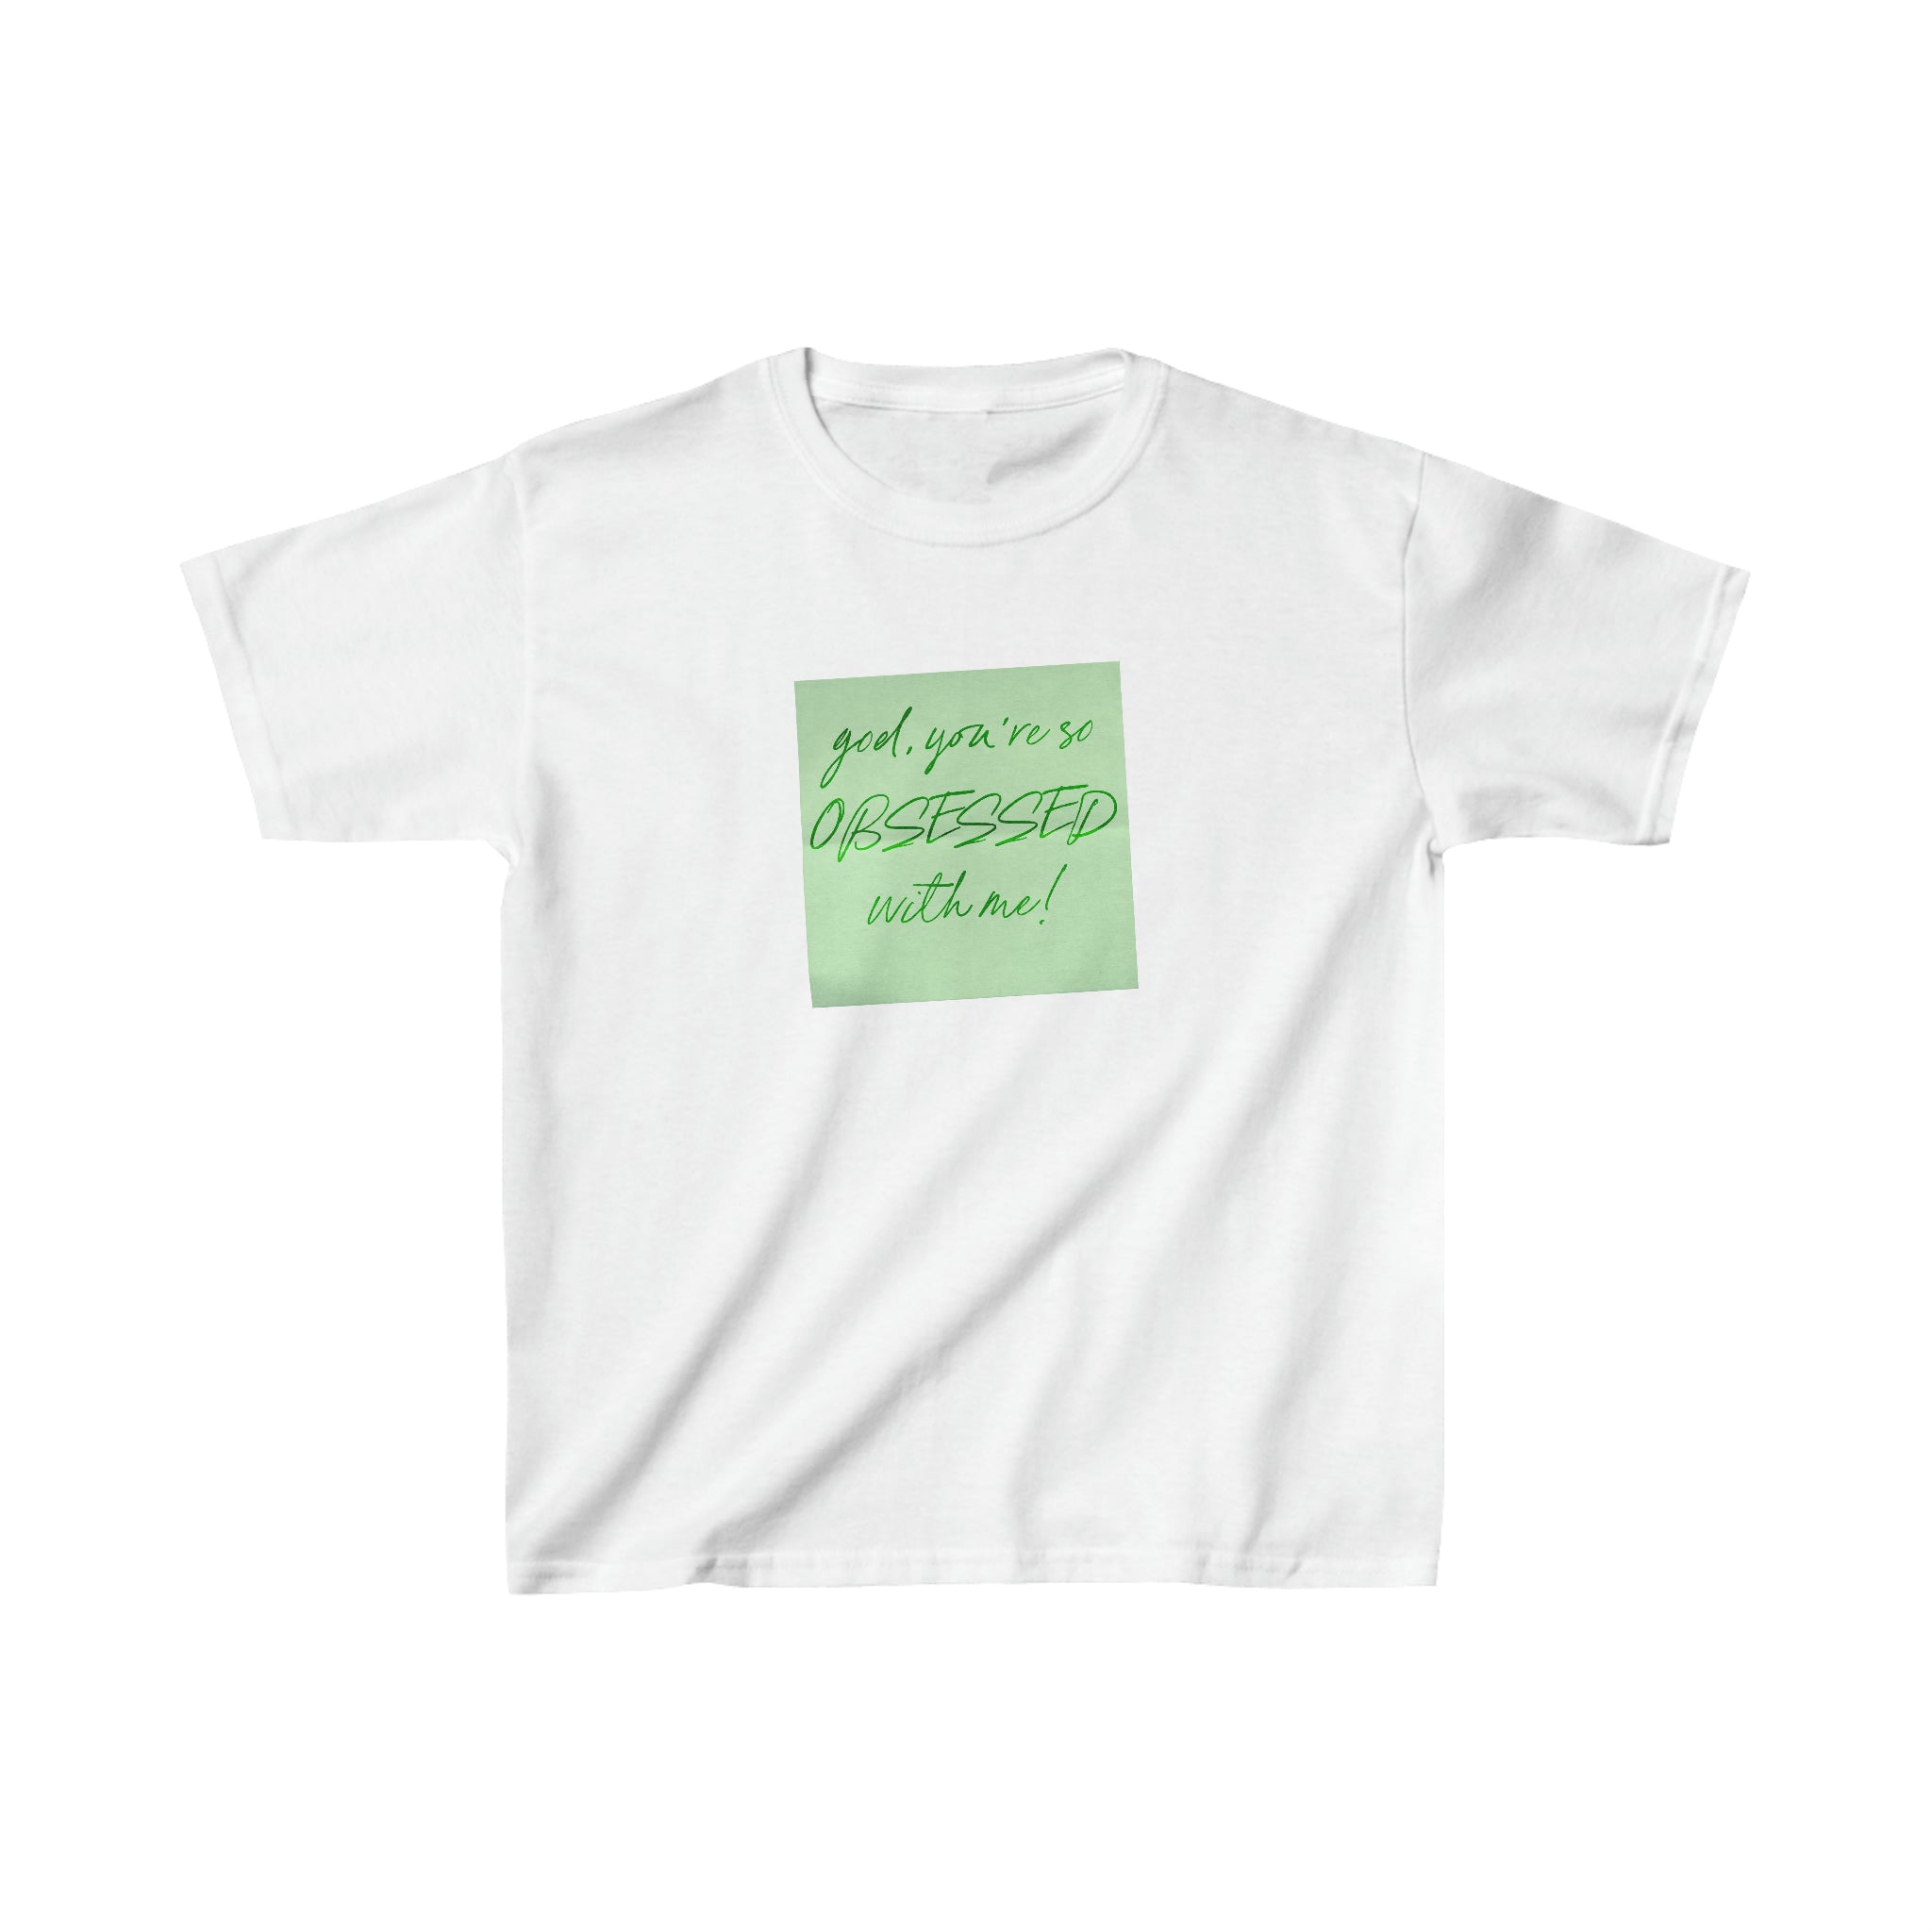 'God, you're so obsessed with me!' baby tee - In Print We Trust